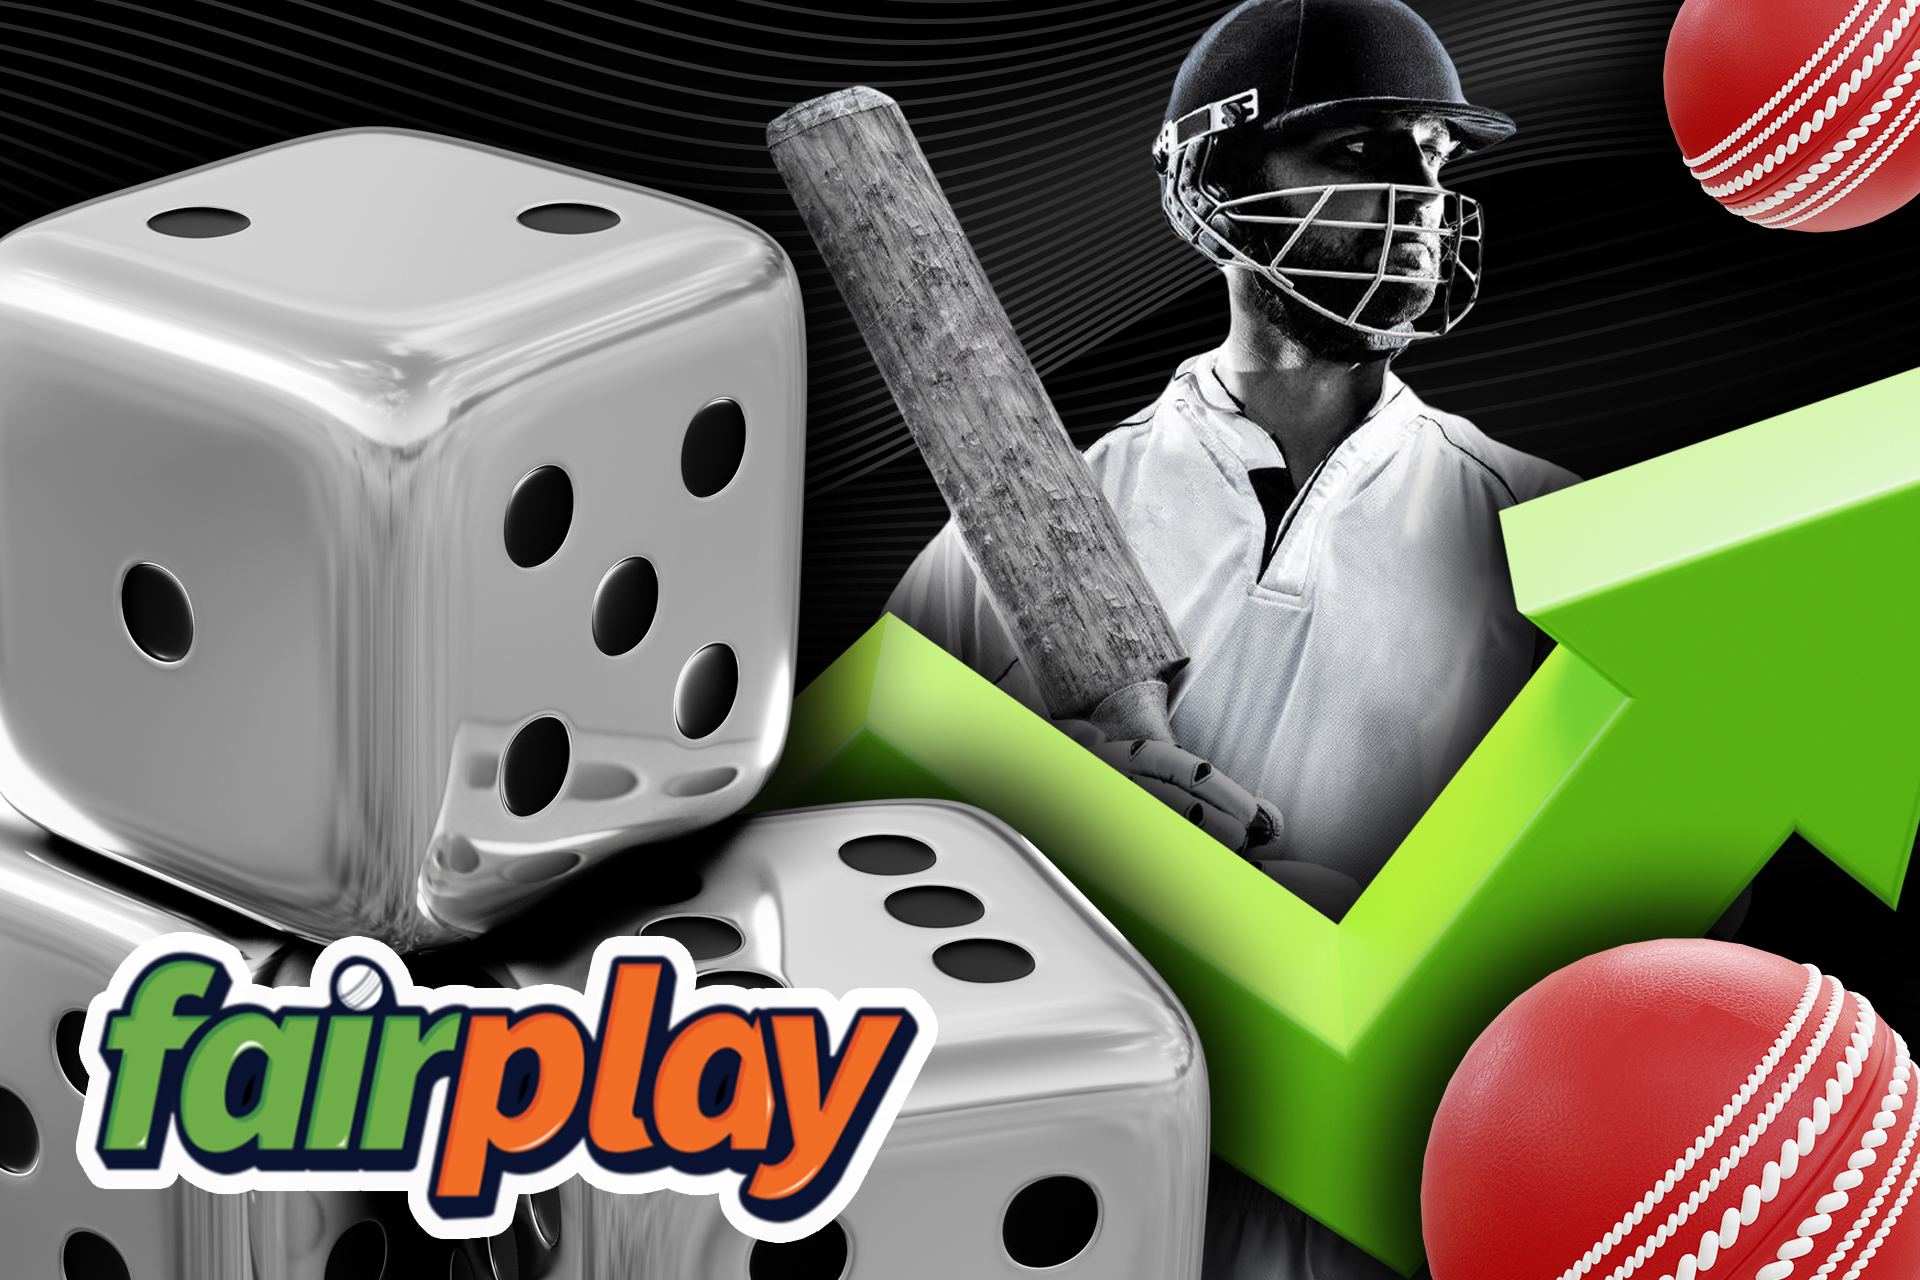 You can bet on various cricket markets on Fairplay.